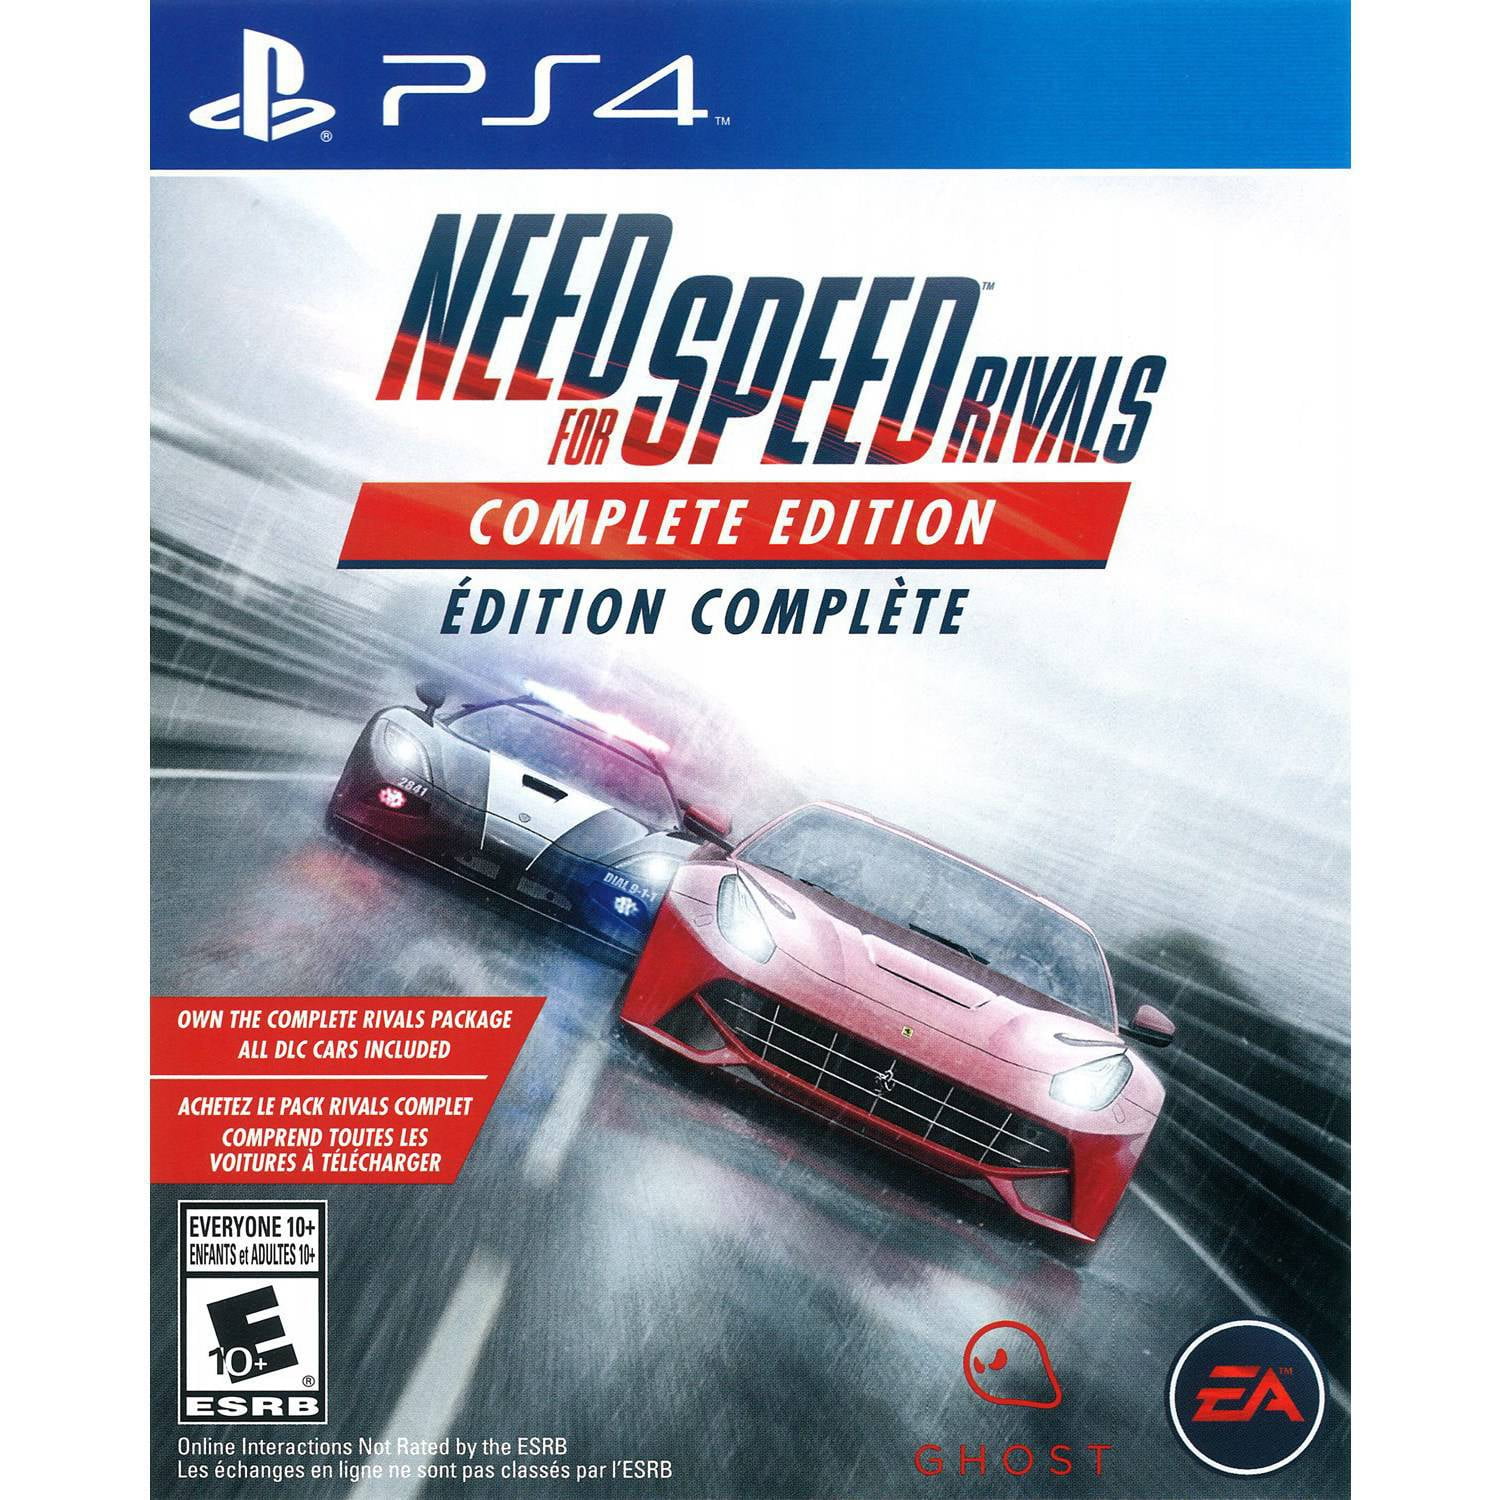 NEED FOR SPEED Rivals PS4 GC PAL $14.50 - PicClick AU